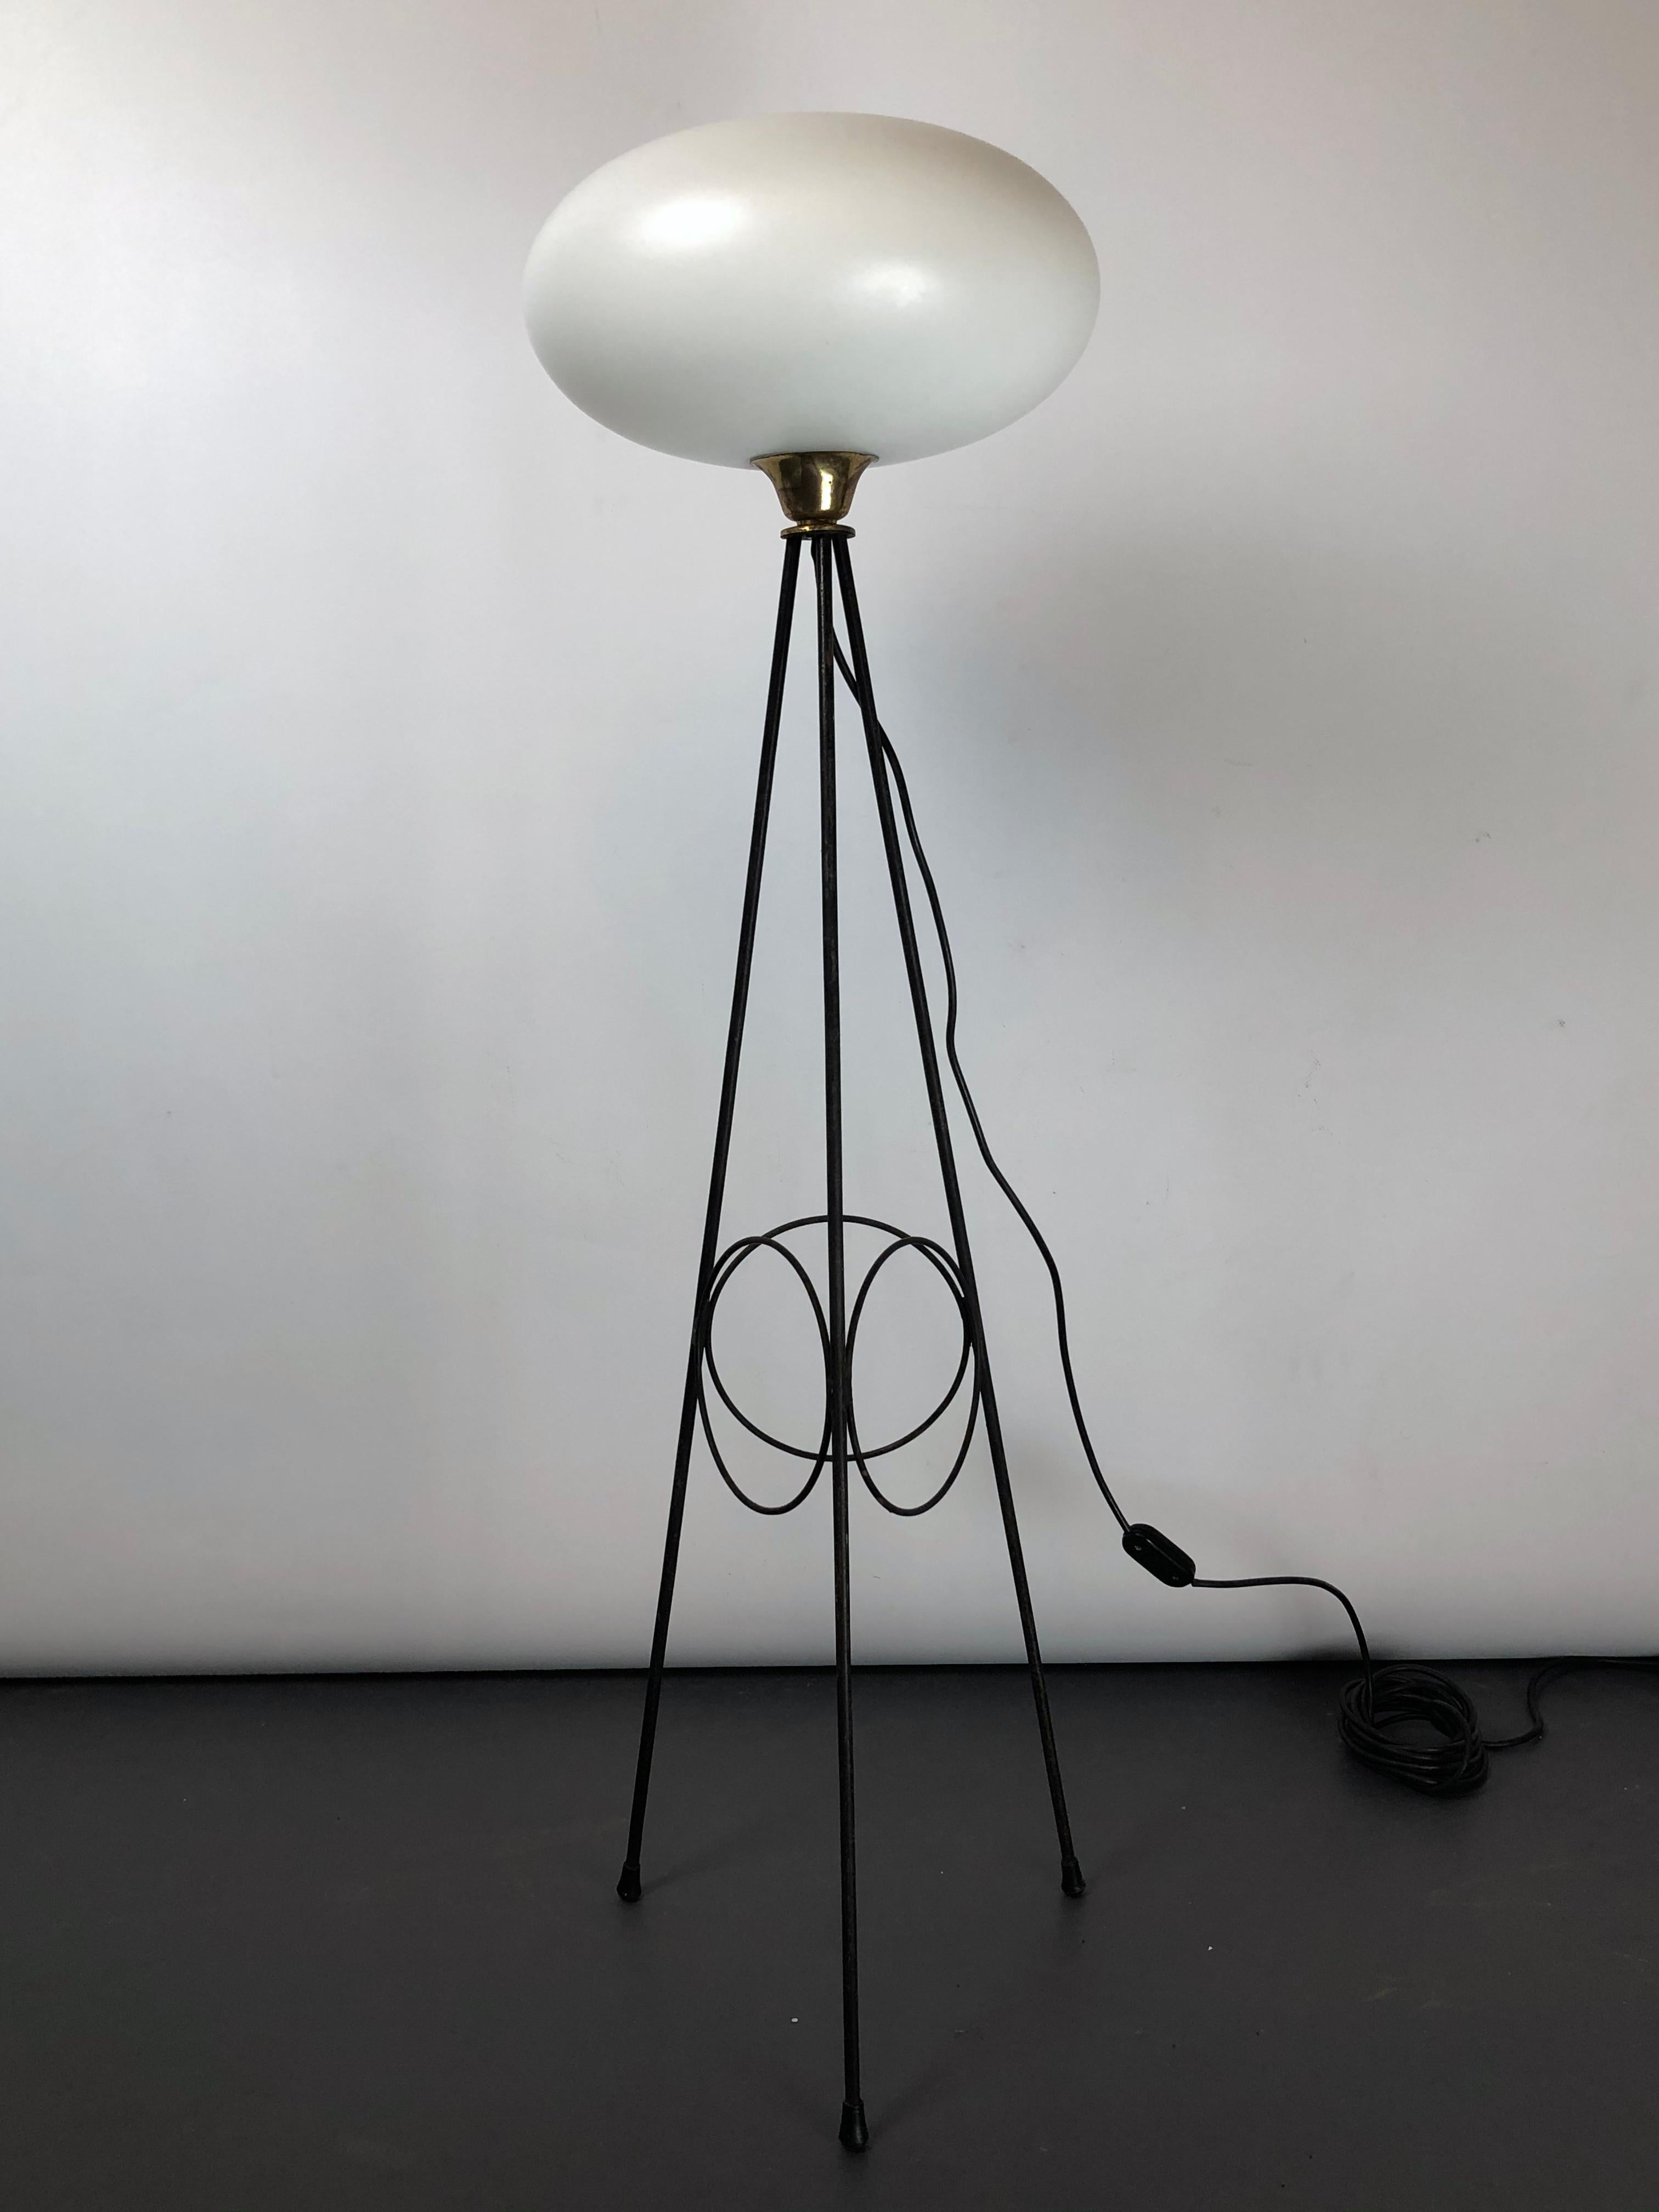 Great vintage condition with original patina for this Italian tripod floor lamp made from brass, lacquer and triplex opaline glass. Produced in Italy during the 1950s. Full working with EU standard, adaptable on demand for USA standard.